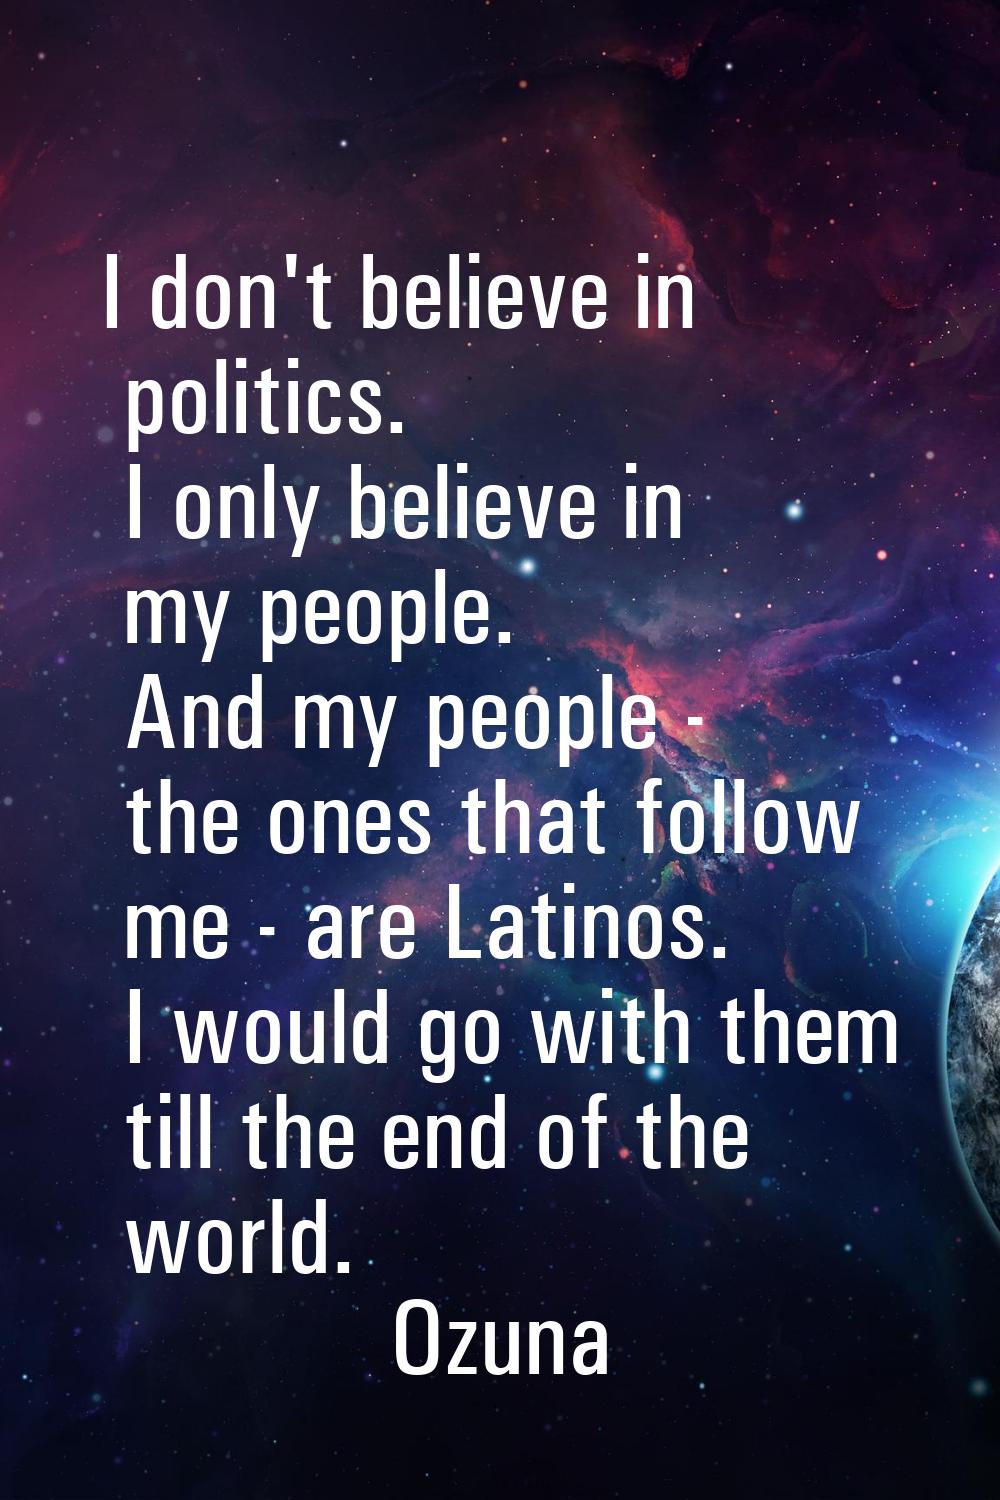 I don't believe in politics. I only believe in my people. And my people - the ones that follow me -